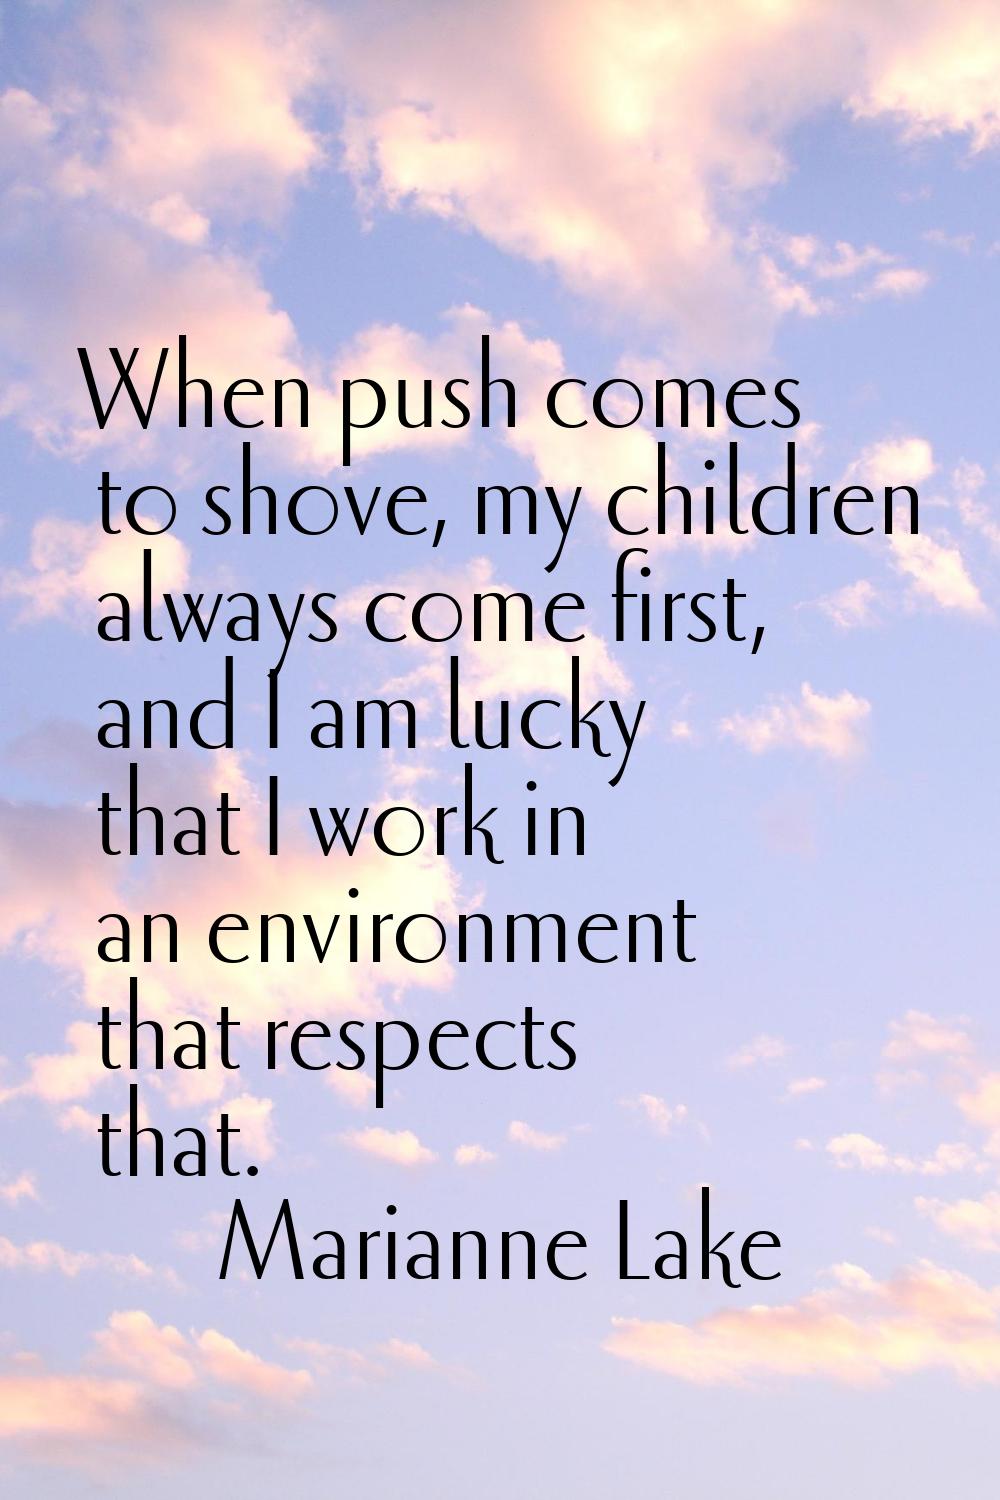 When push comes to shove, my children always come first, and I am lucky that I work in an environme